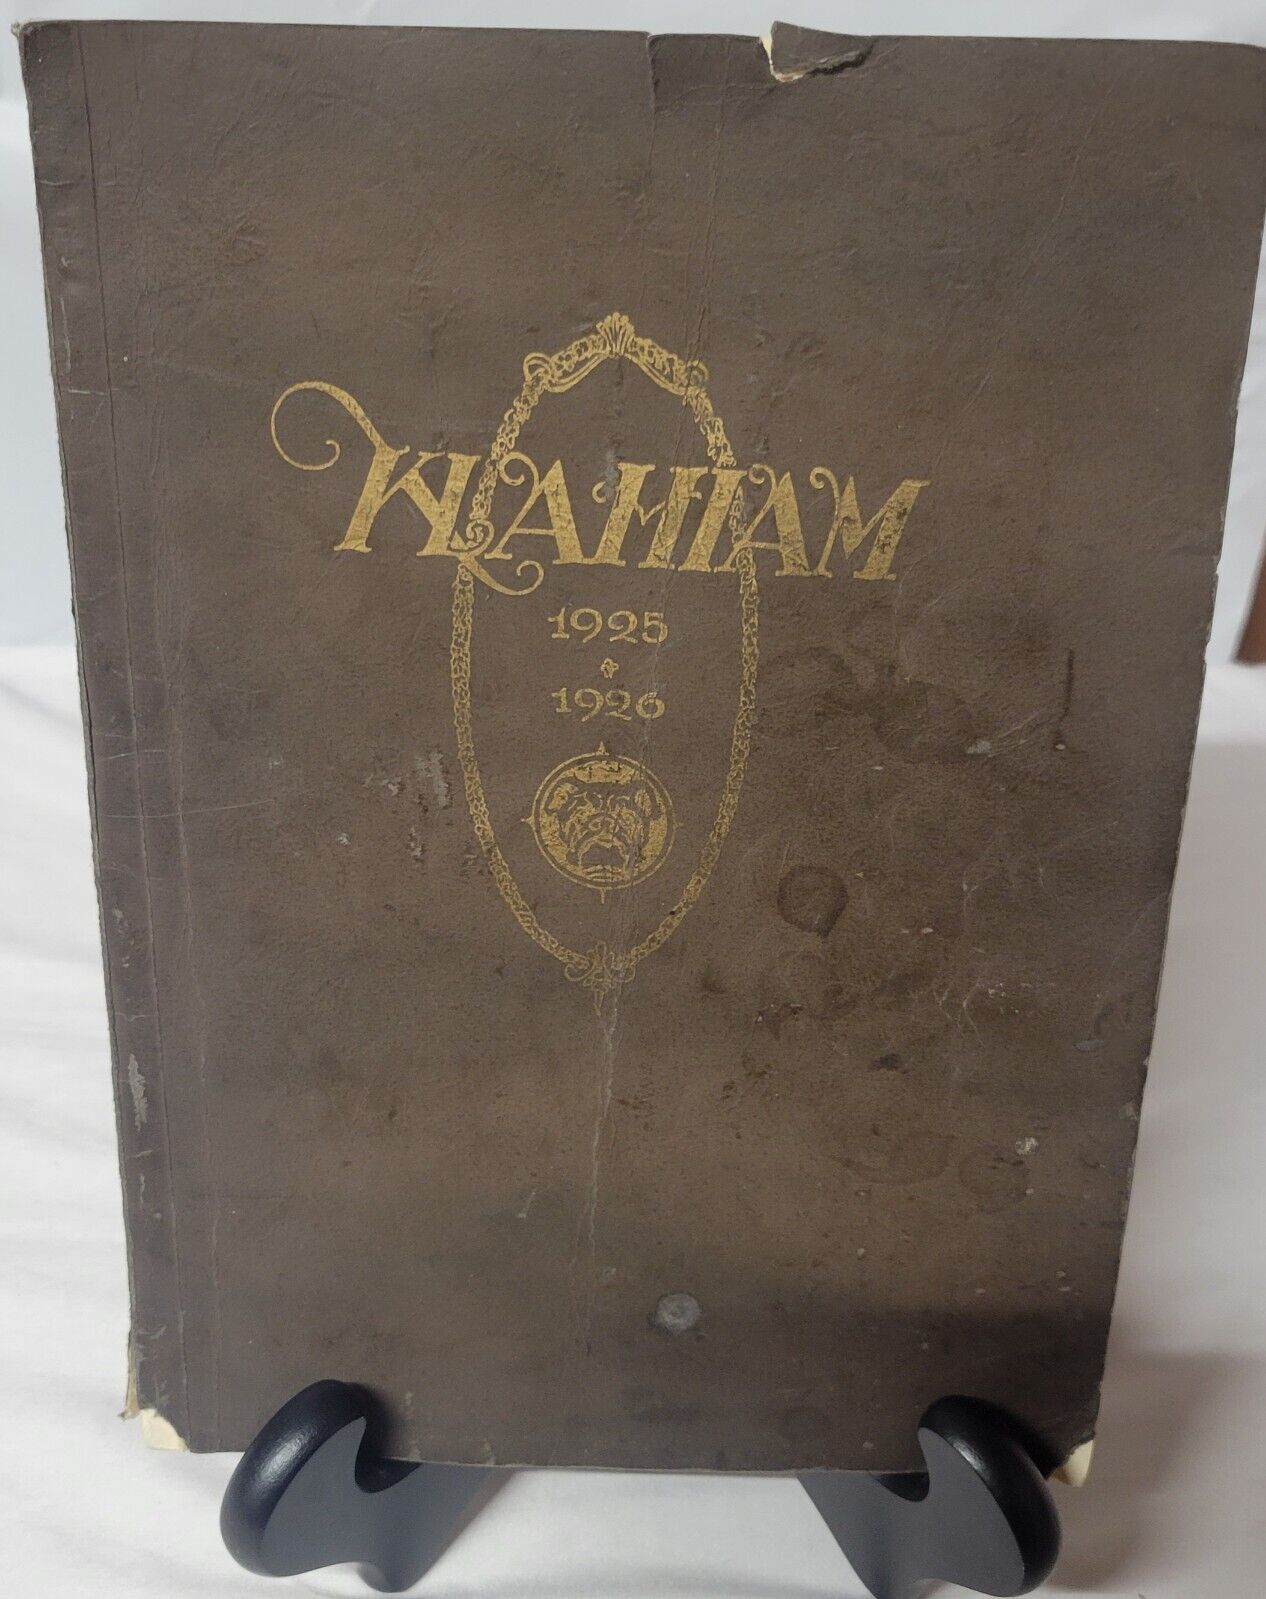 Antique 1925 And 1926 Klahiam School Year Book Soft Cover,Sleeved, Tight Binding